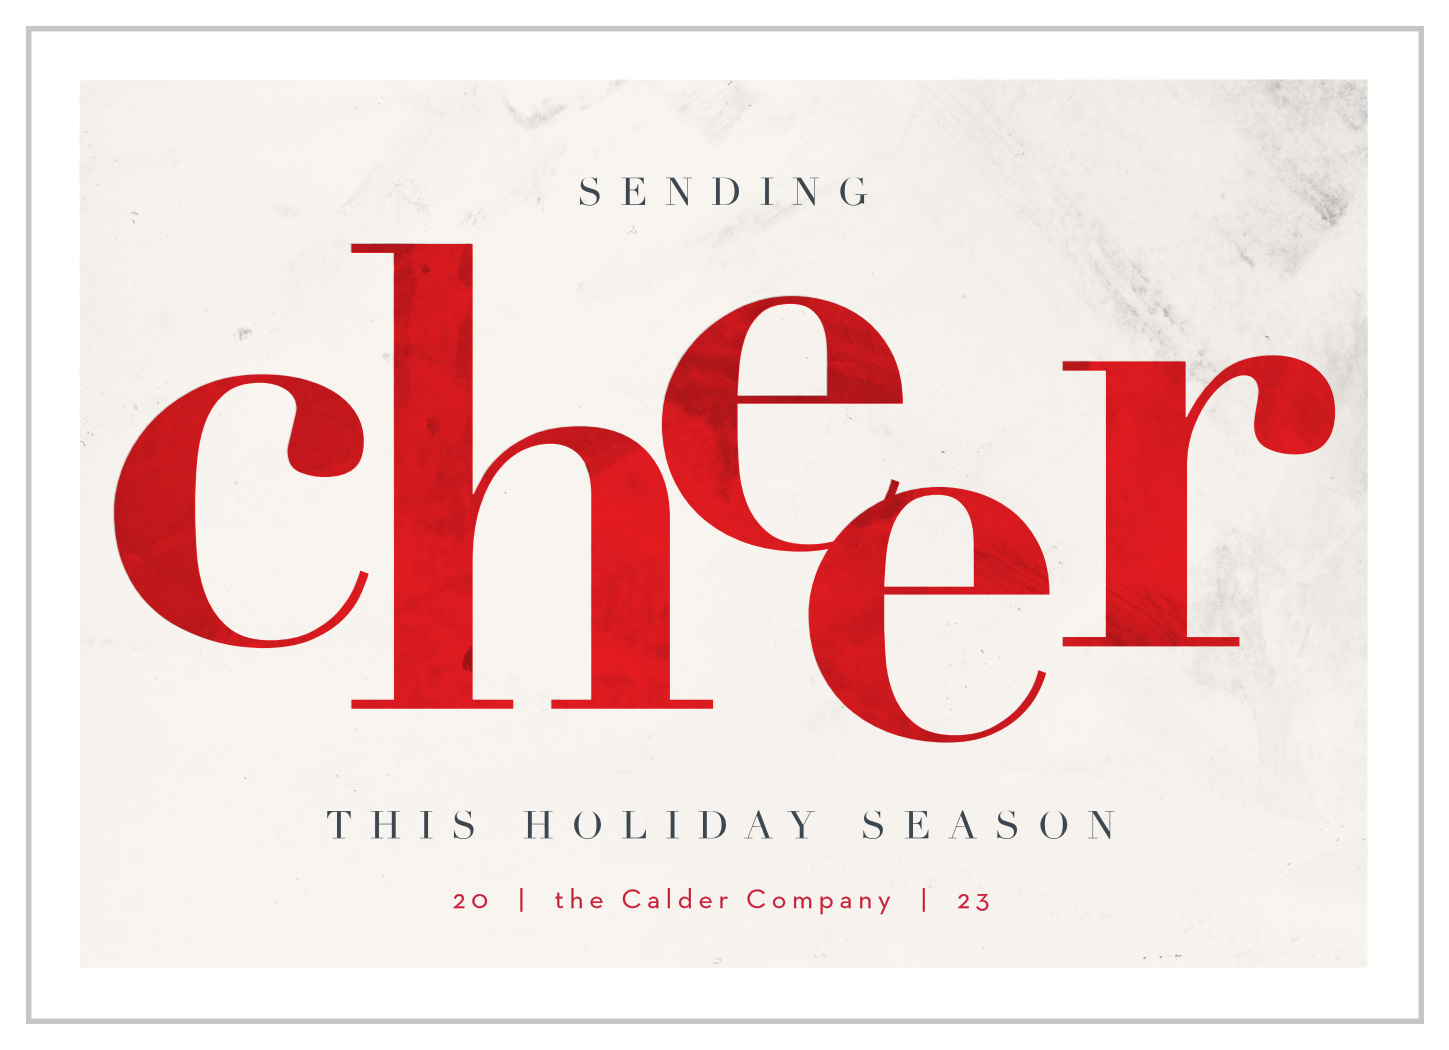 Sending Cheer Corporate Holiday Cards